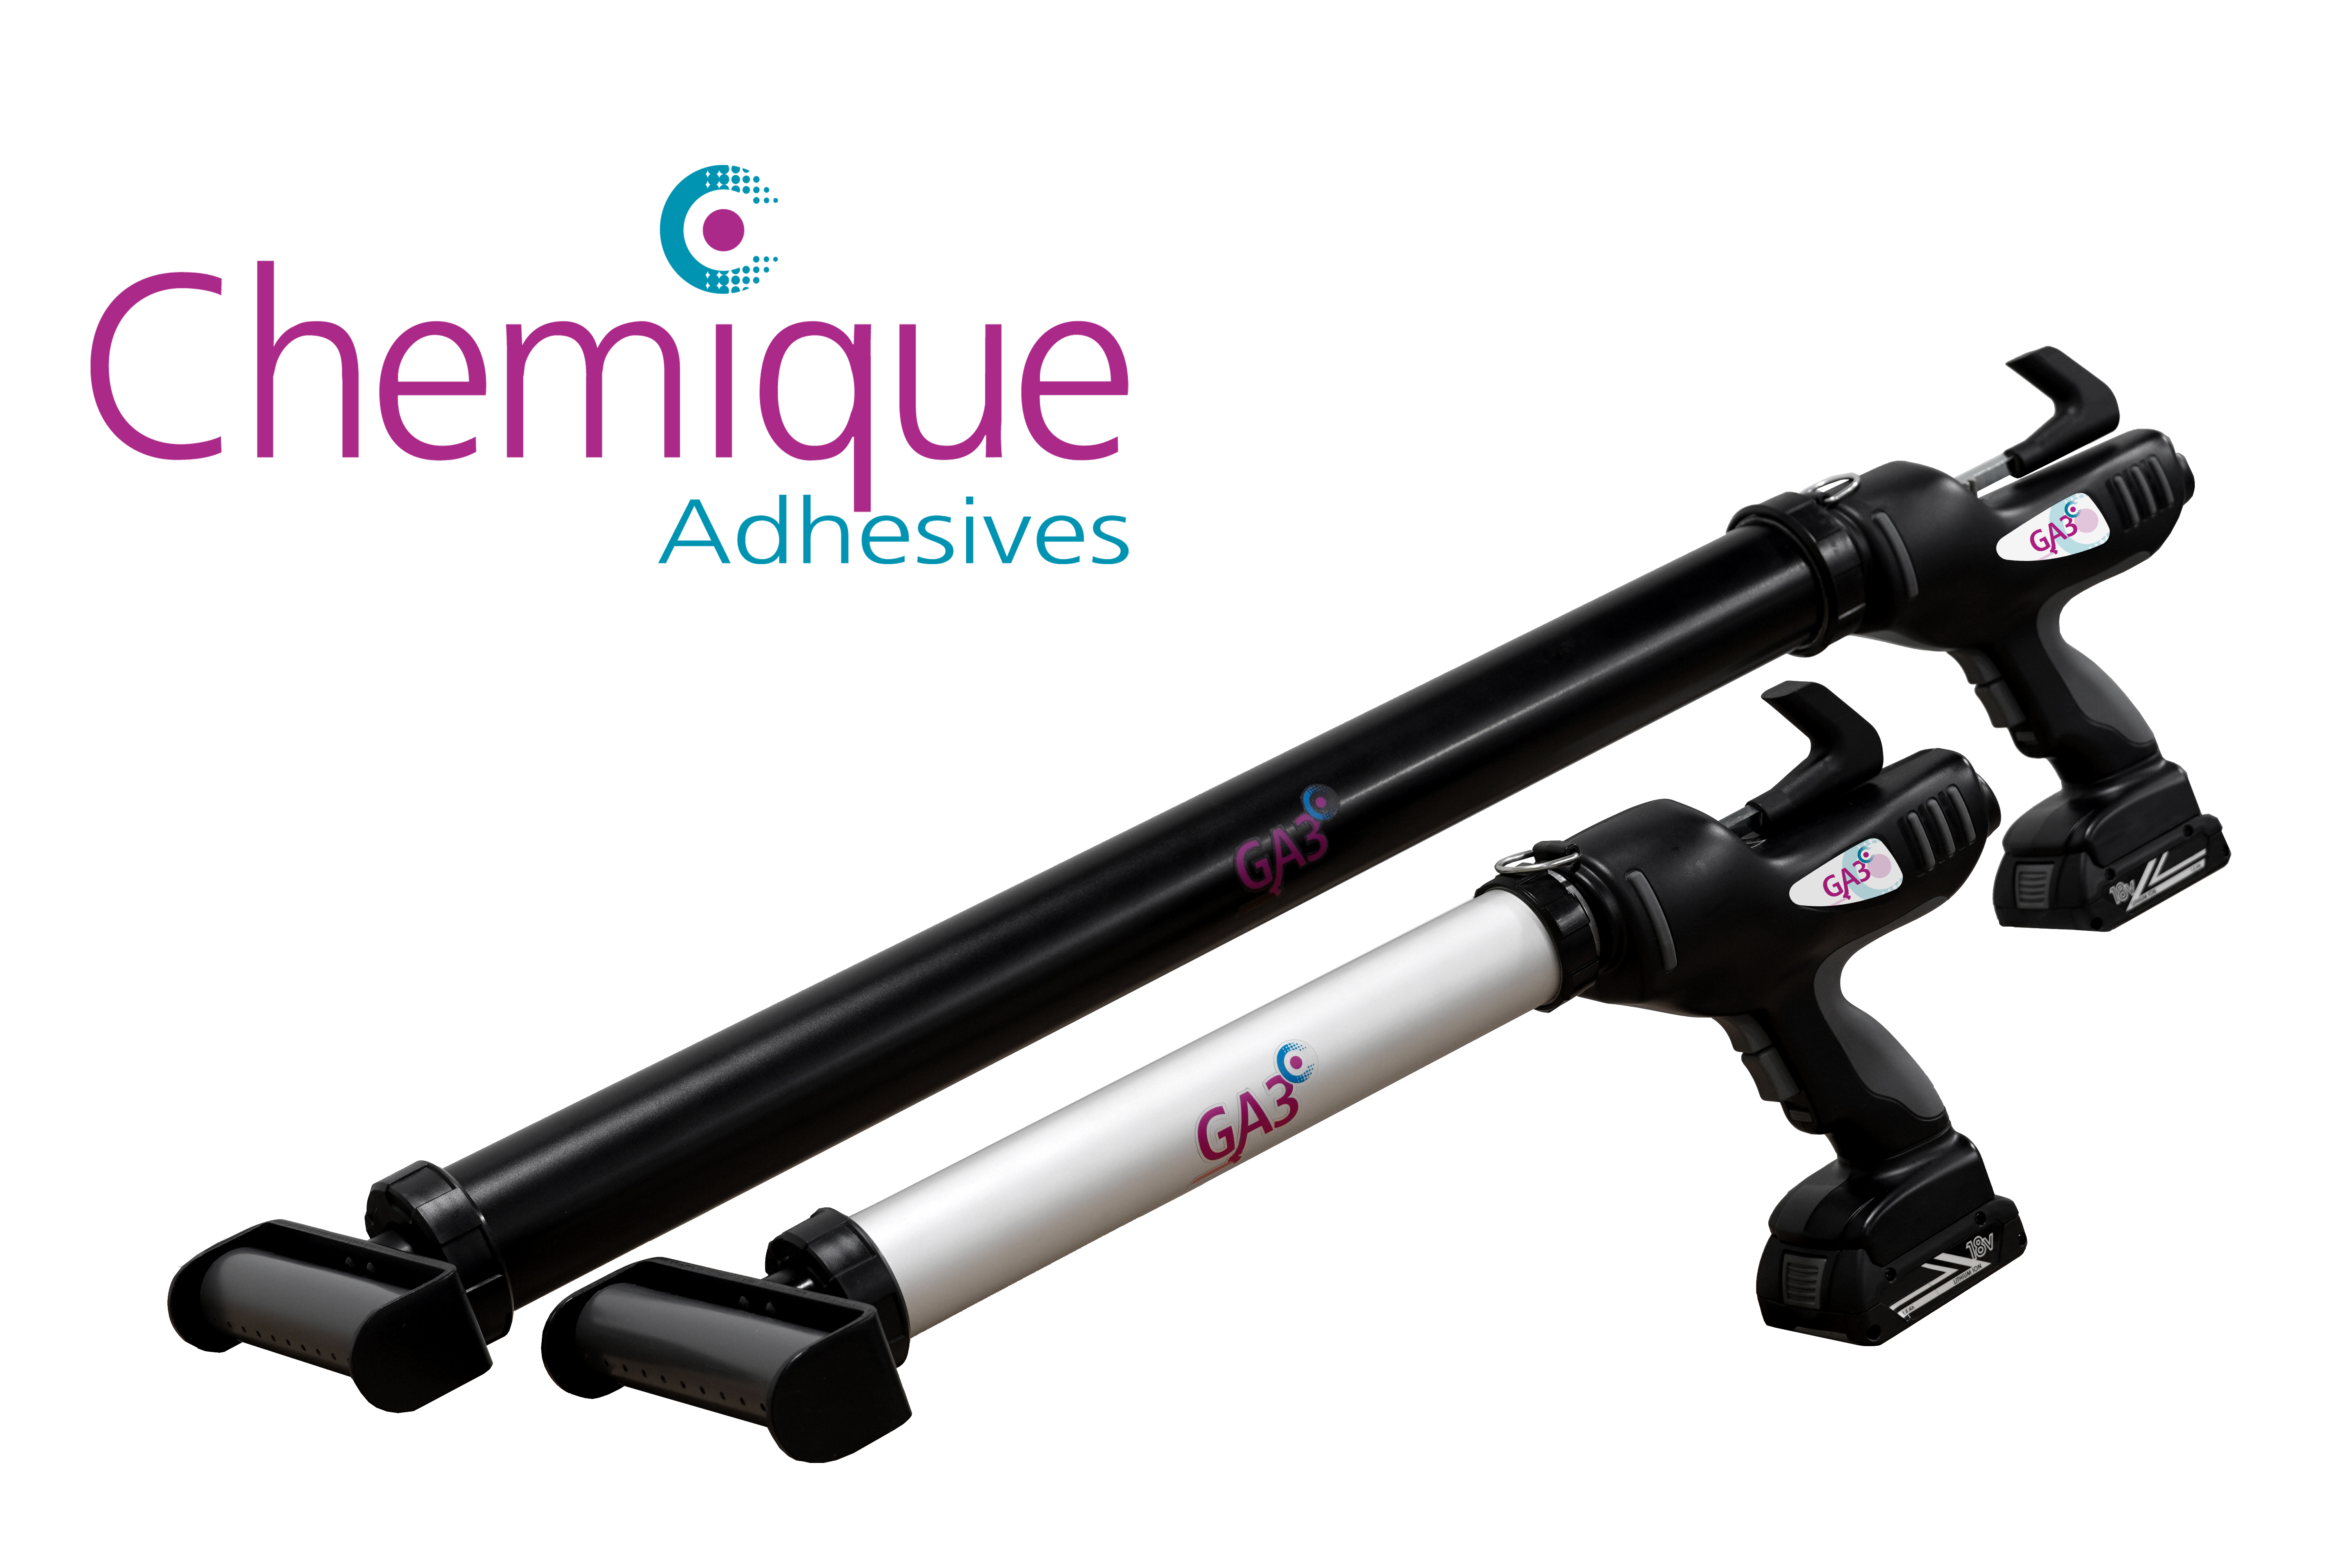 Chemique adhesives GA3 Adhesive Application Systems